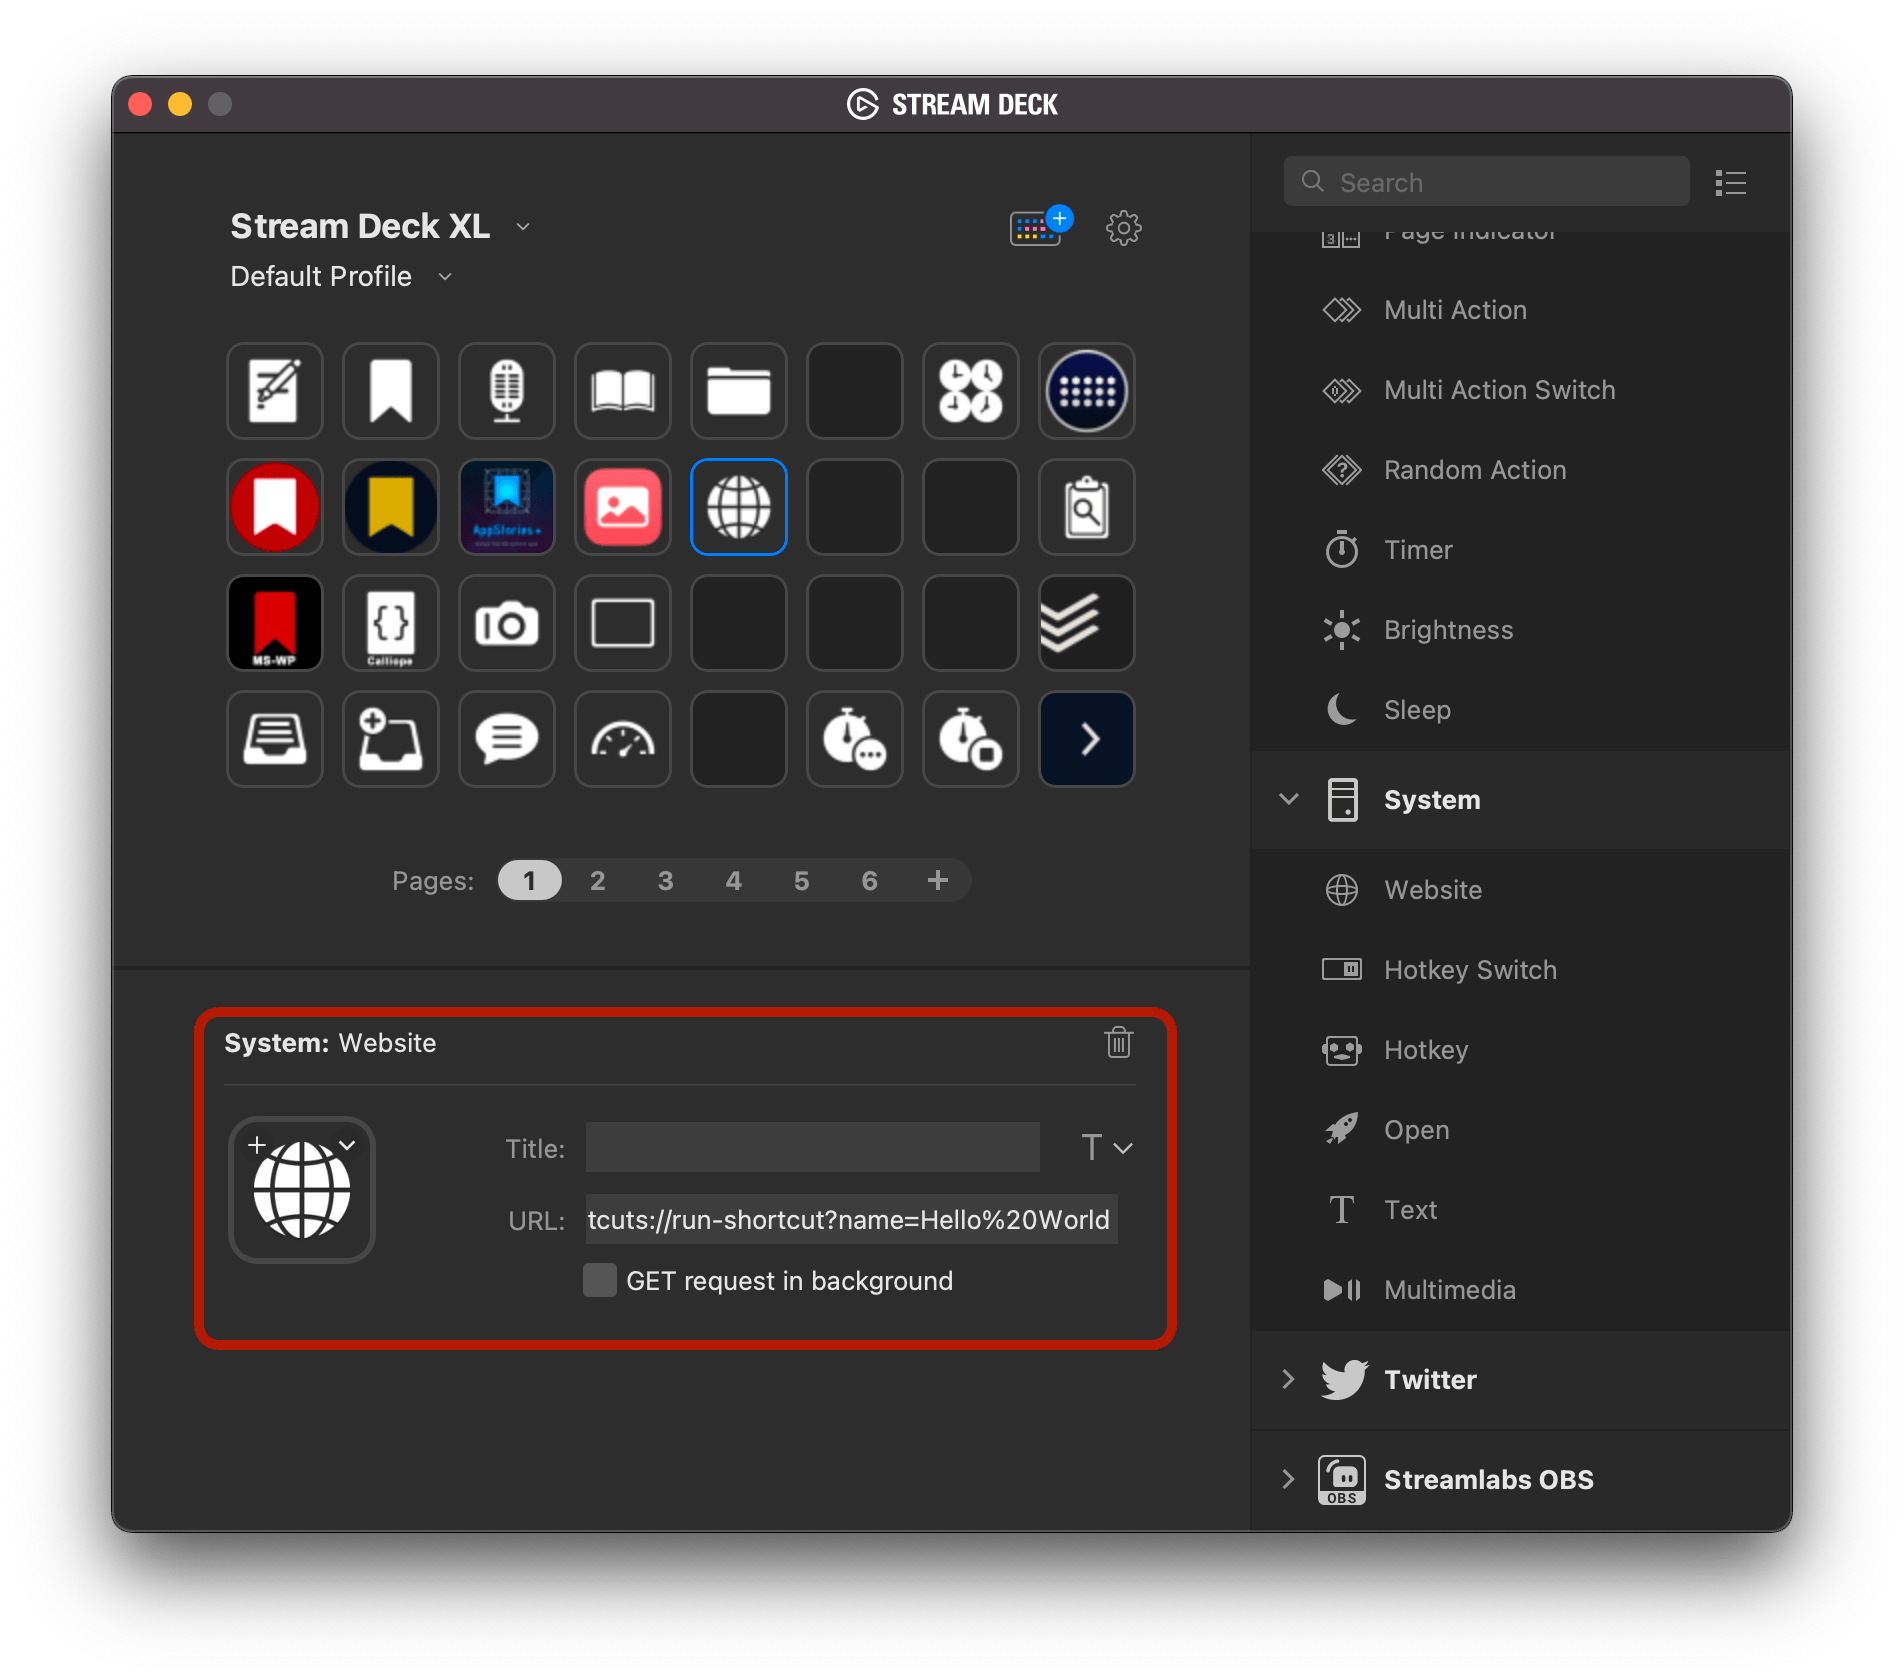 URL schemes work with shortcuts and the Stream Deck too.